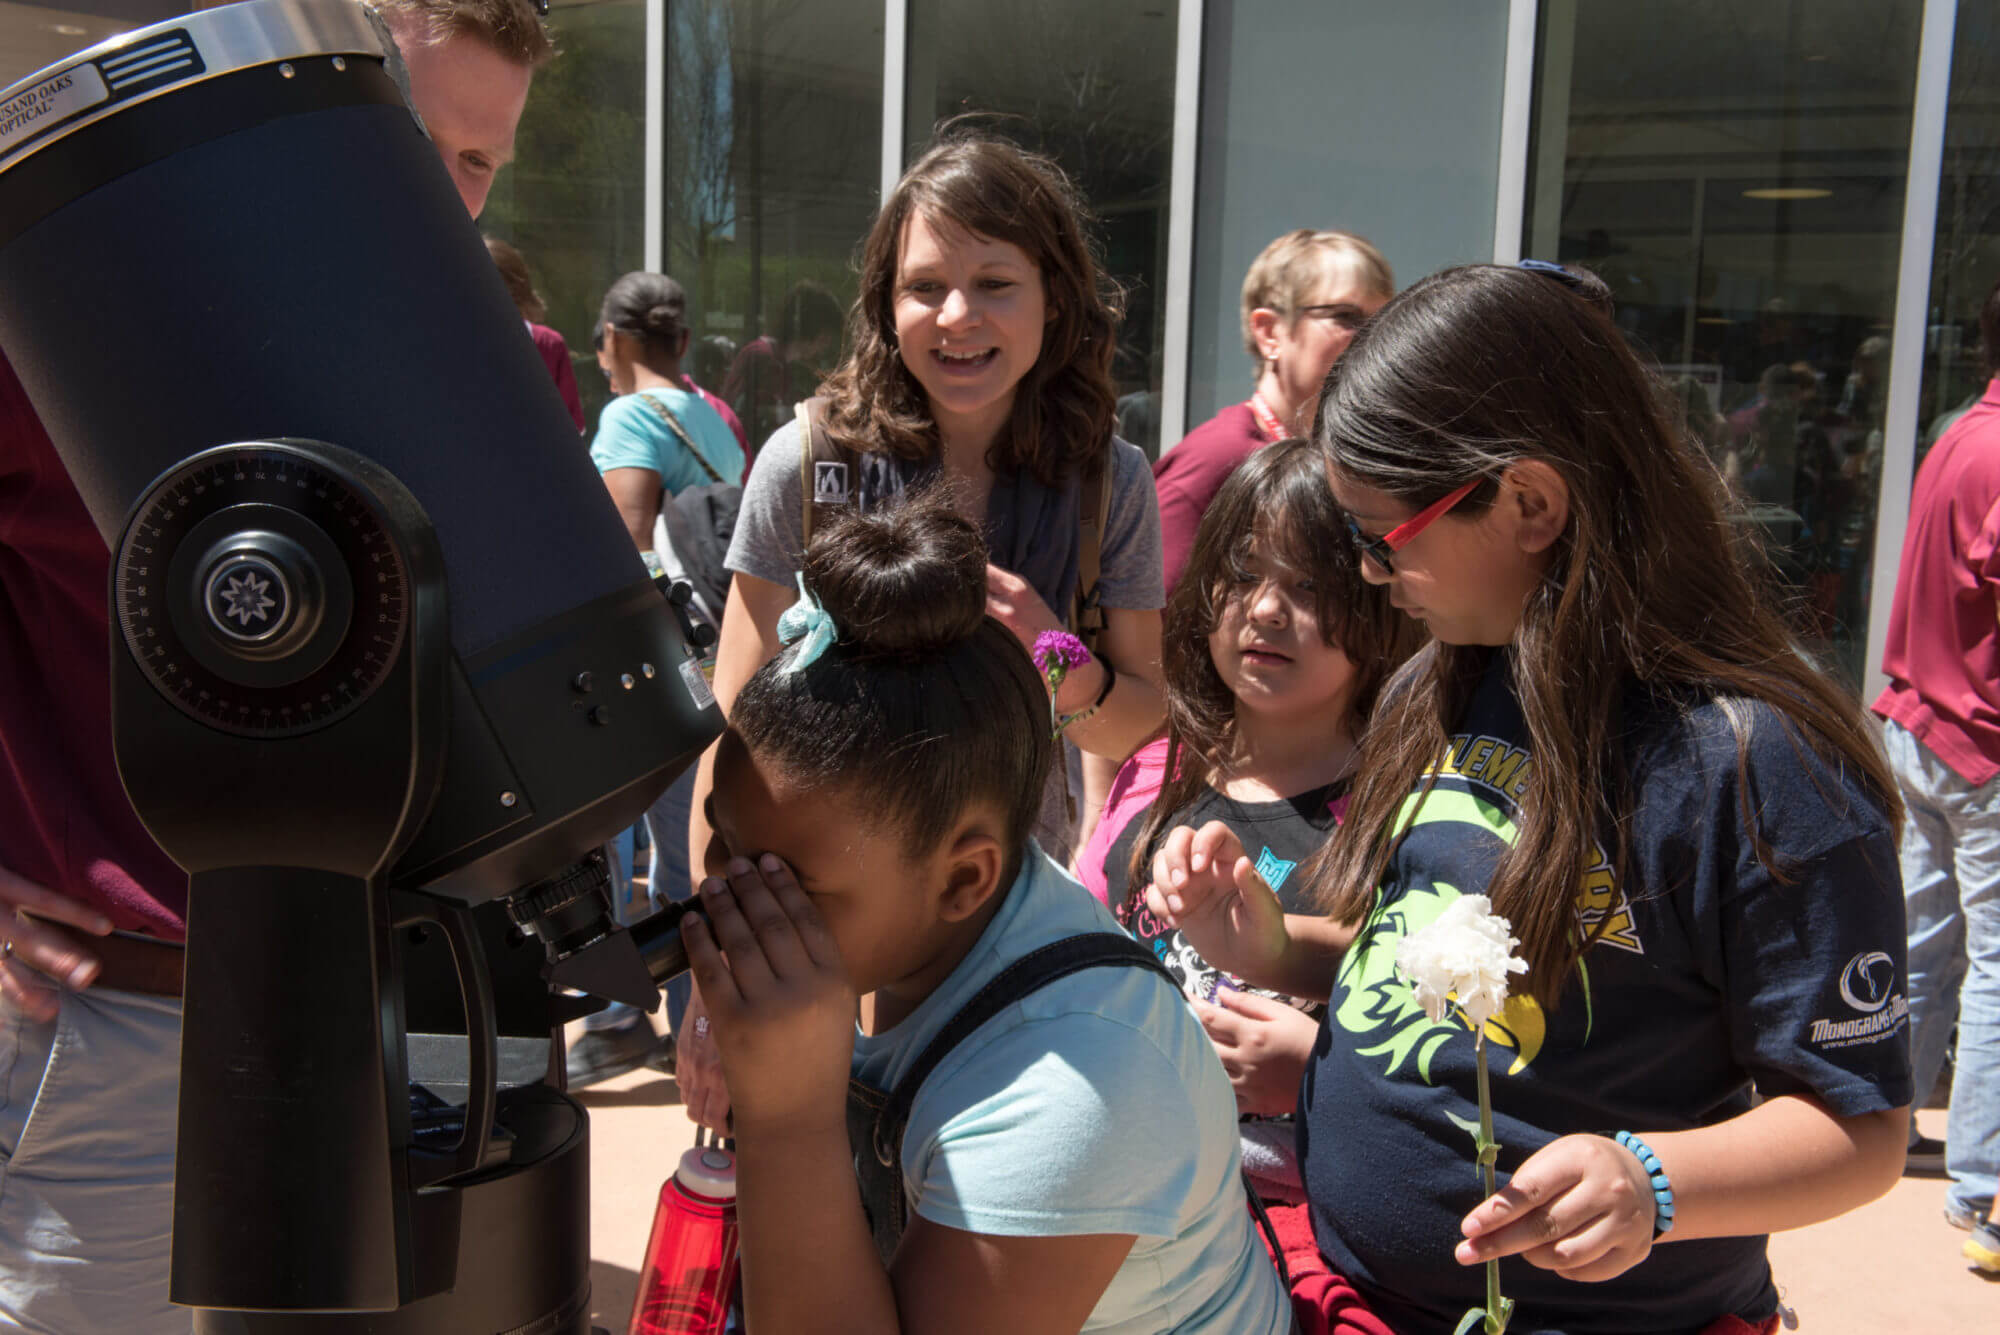 Astronomy in the daytime? Absolutely! We will watch sun spots if weather permits.